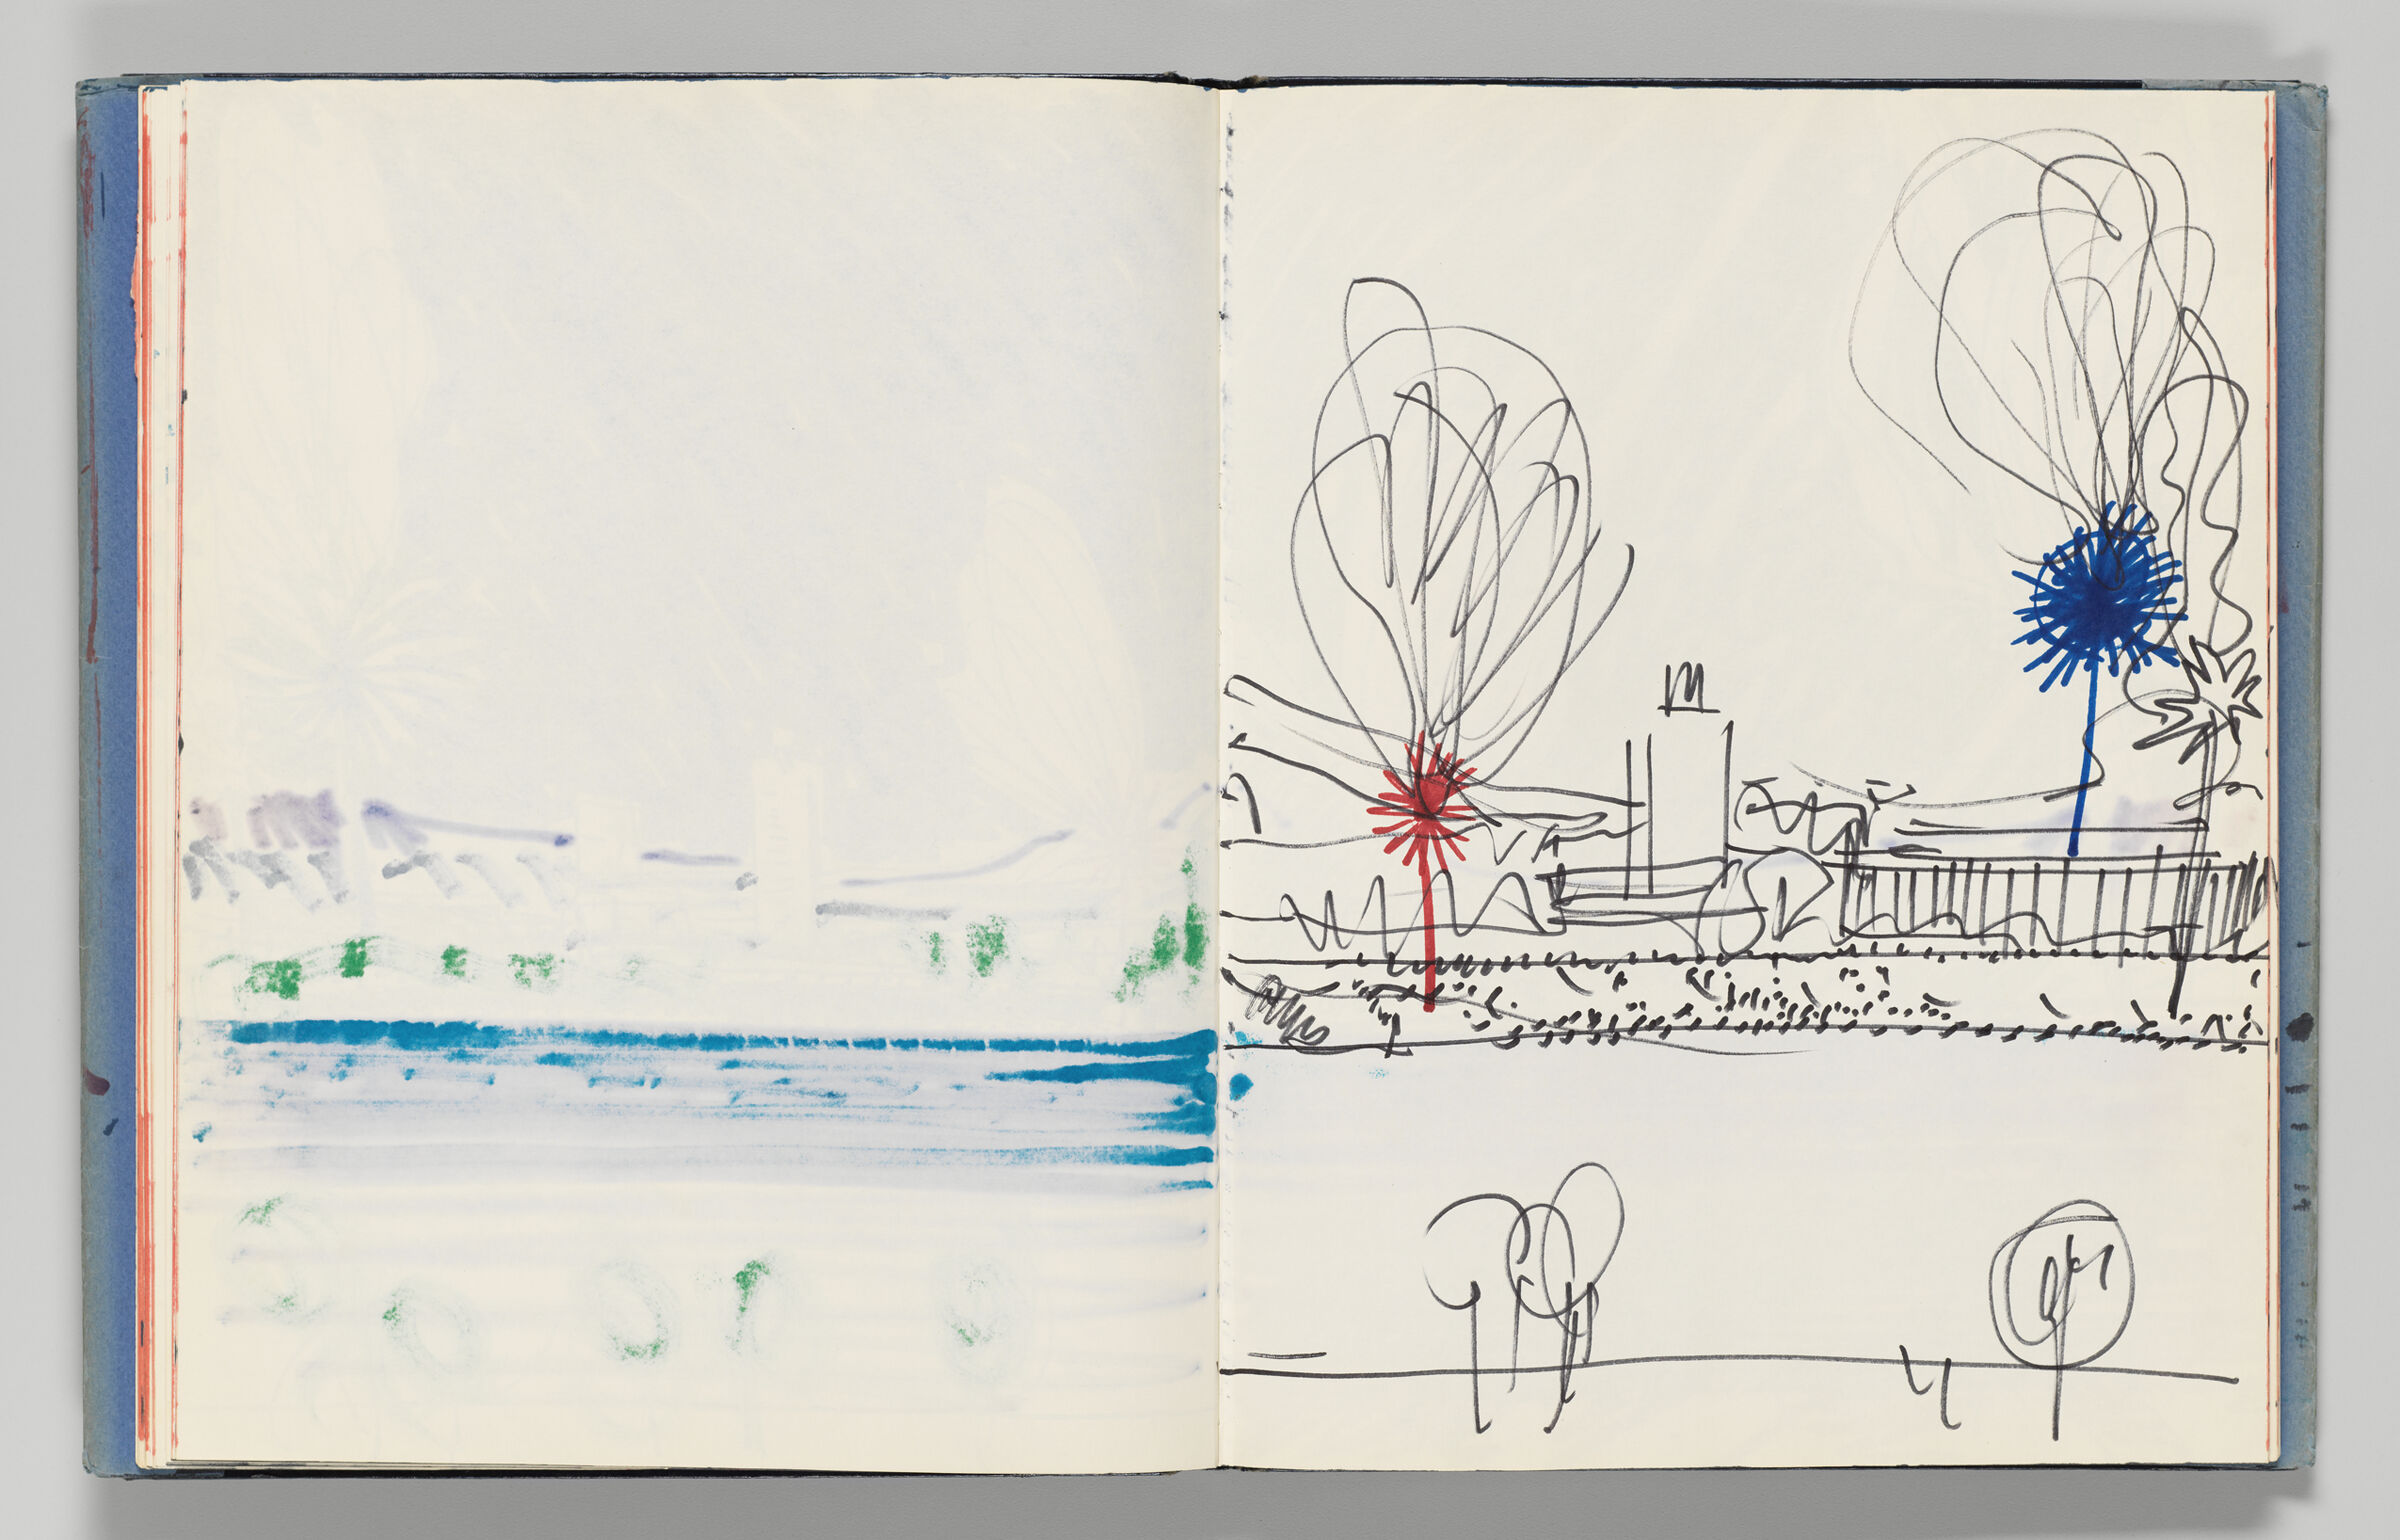 Untitled (Bleed-Through Of Previous Page, Left Page); Untitled (Designs For Sky Art In Linz, Right Page)